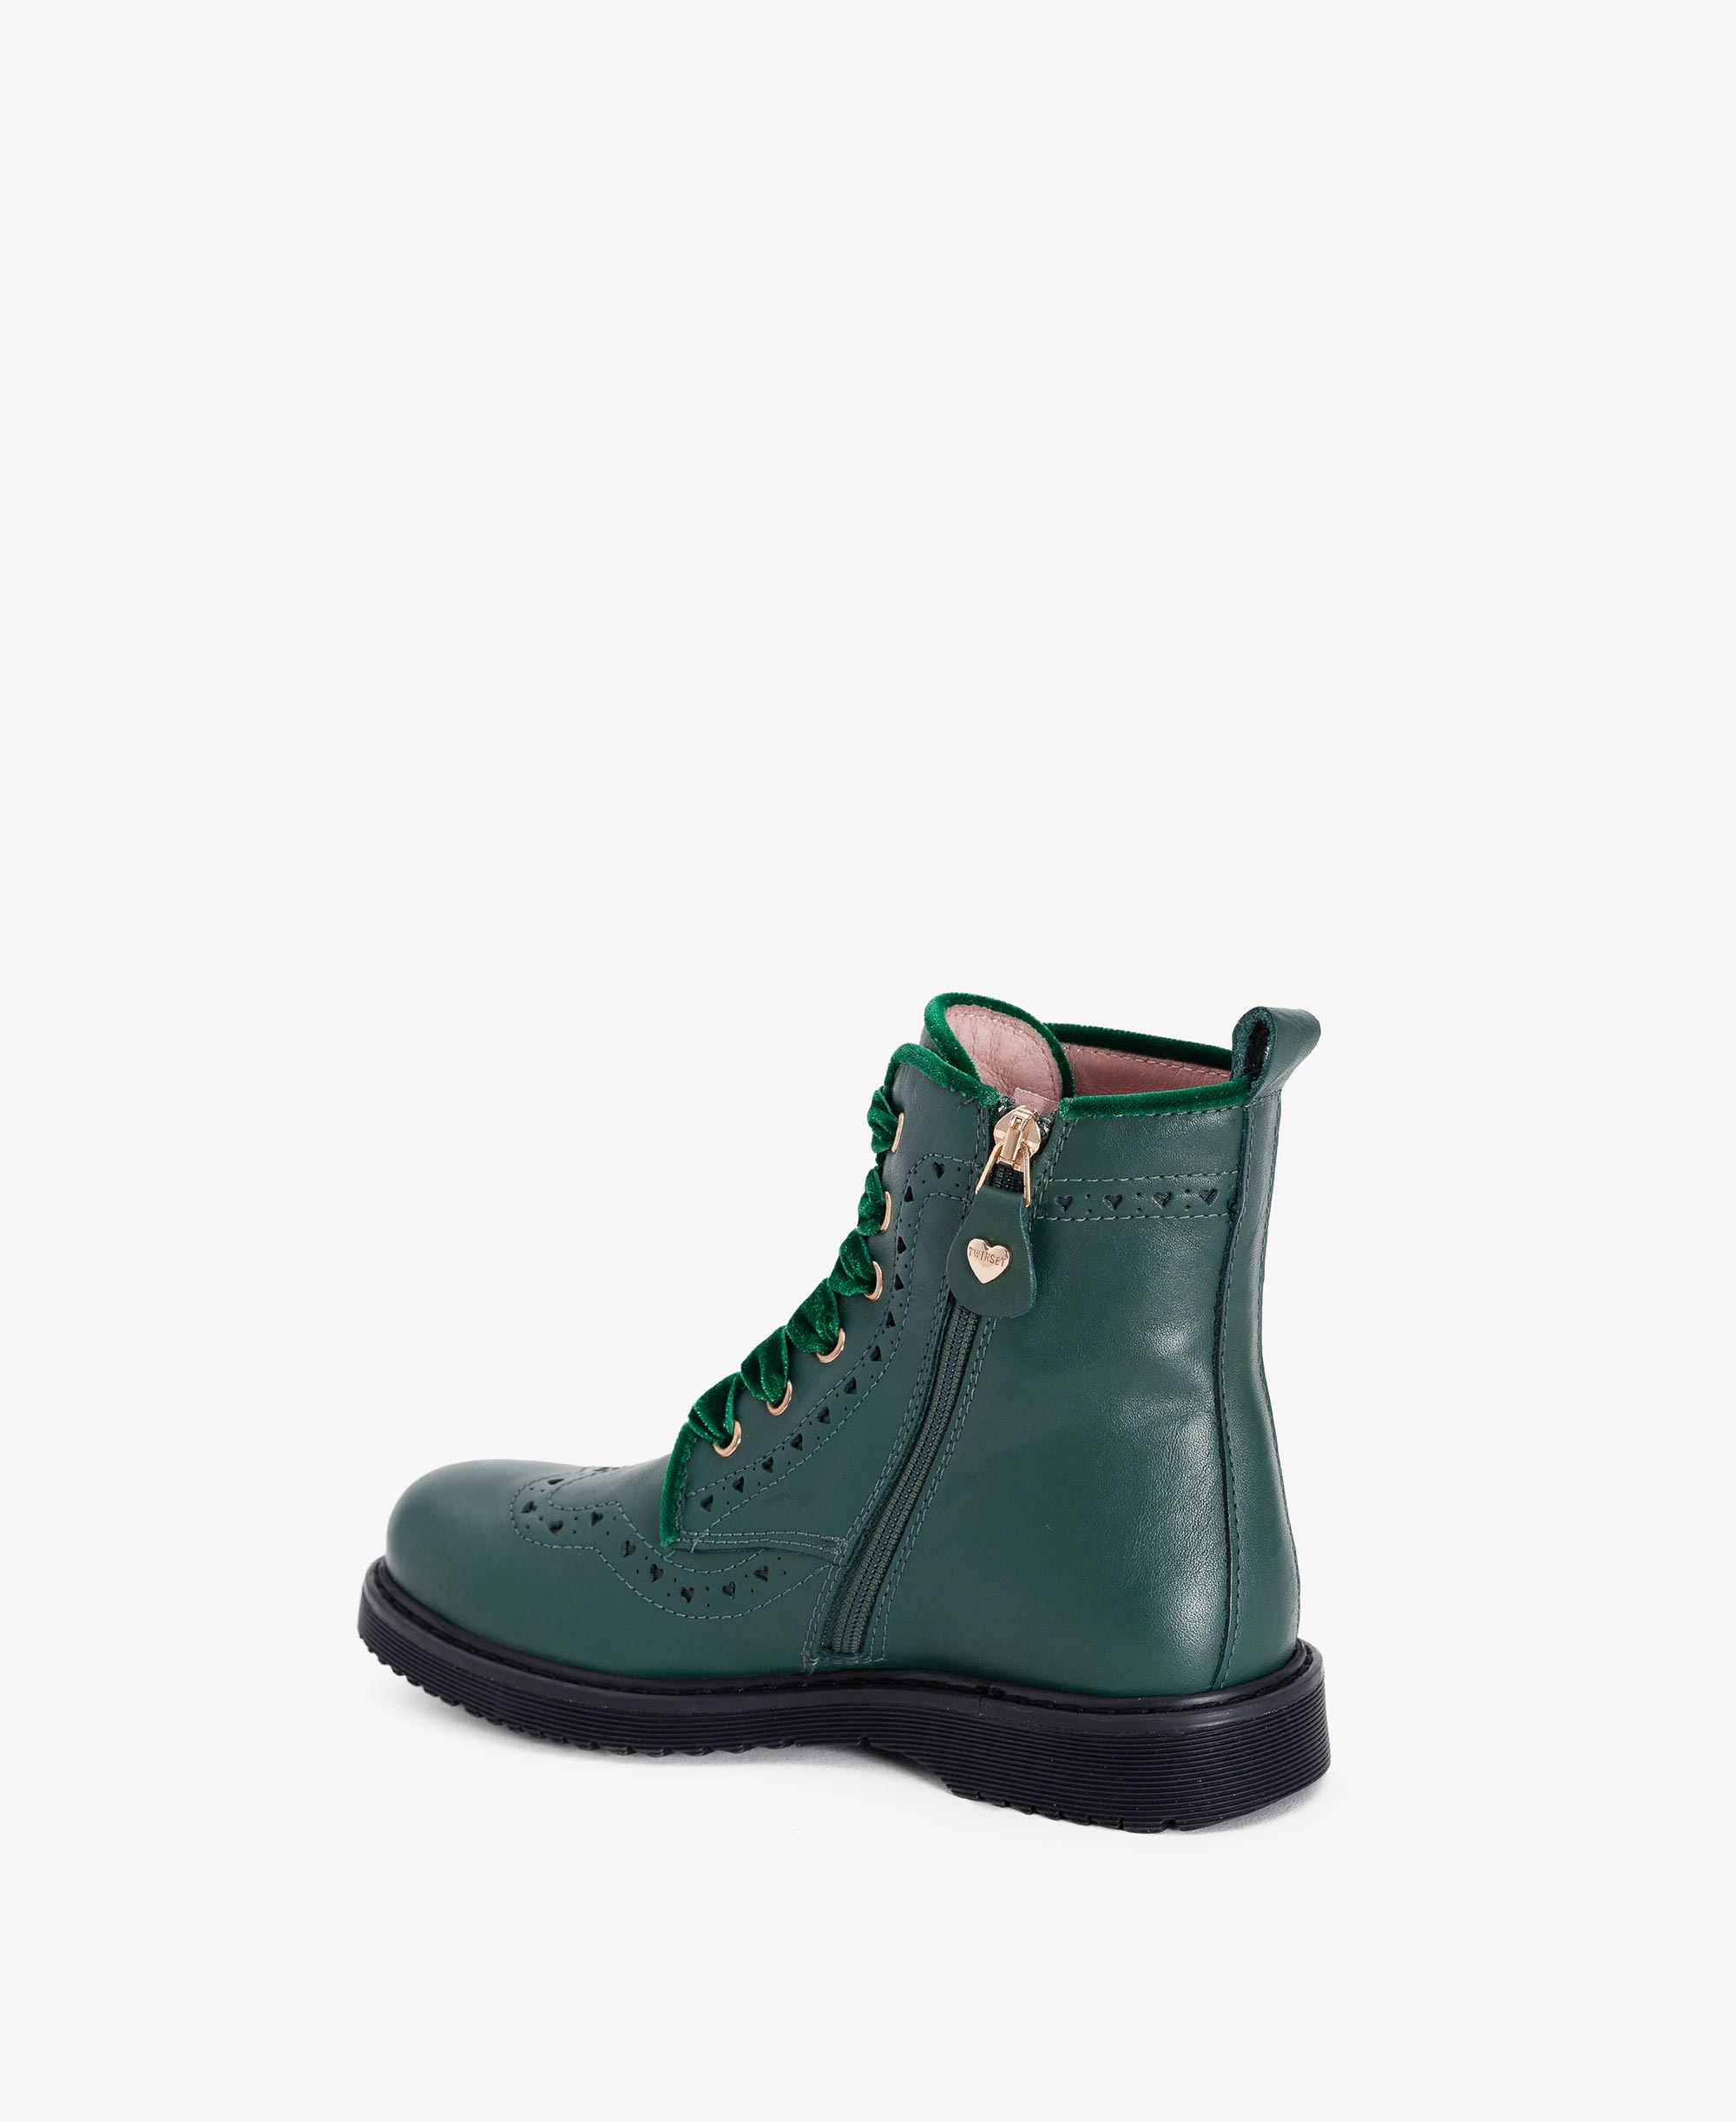 turquoise combat boots